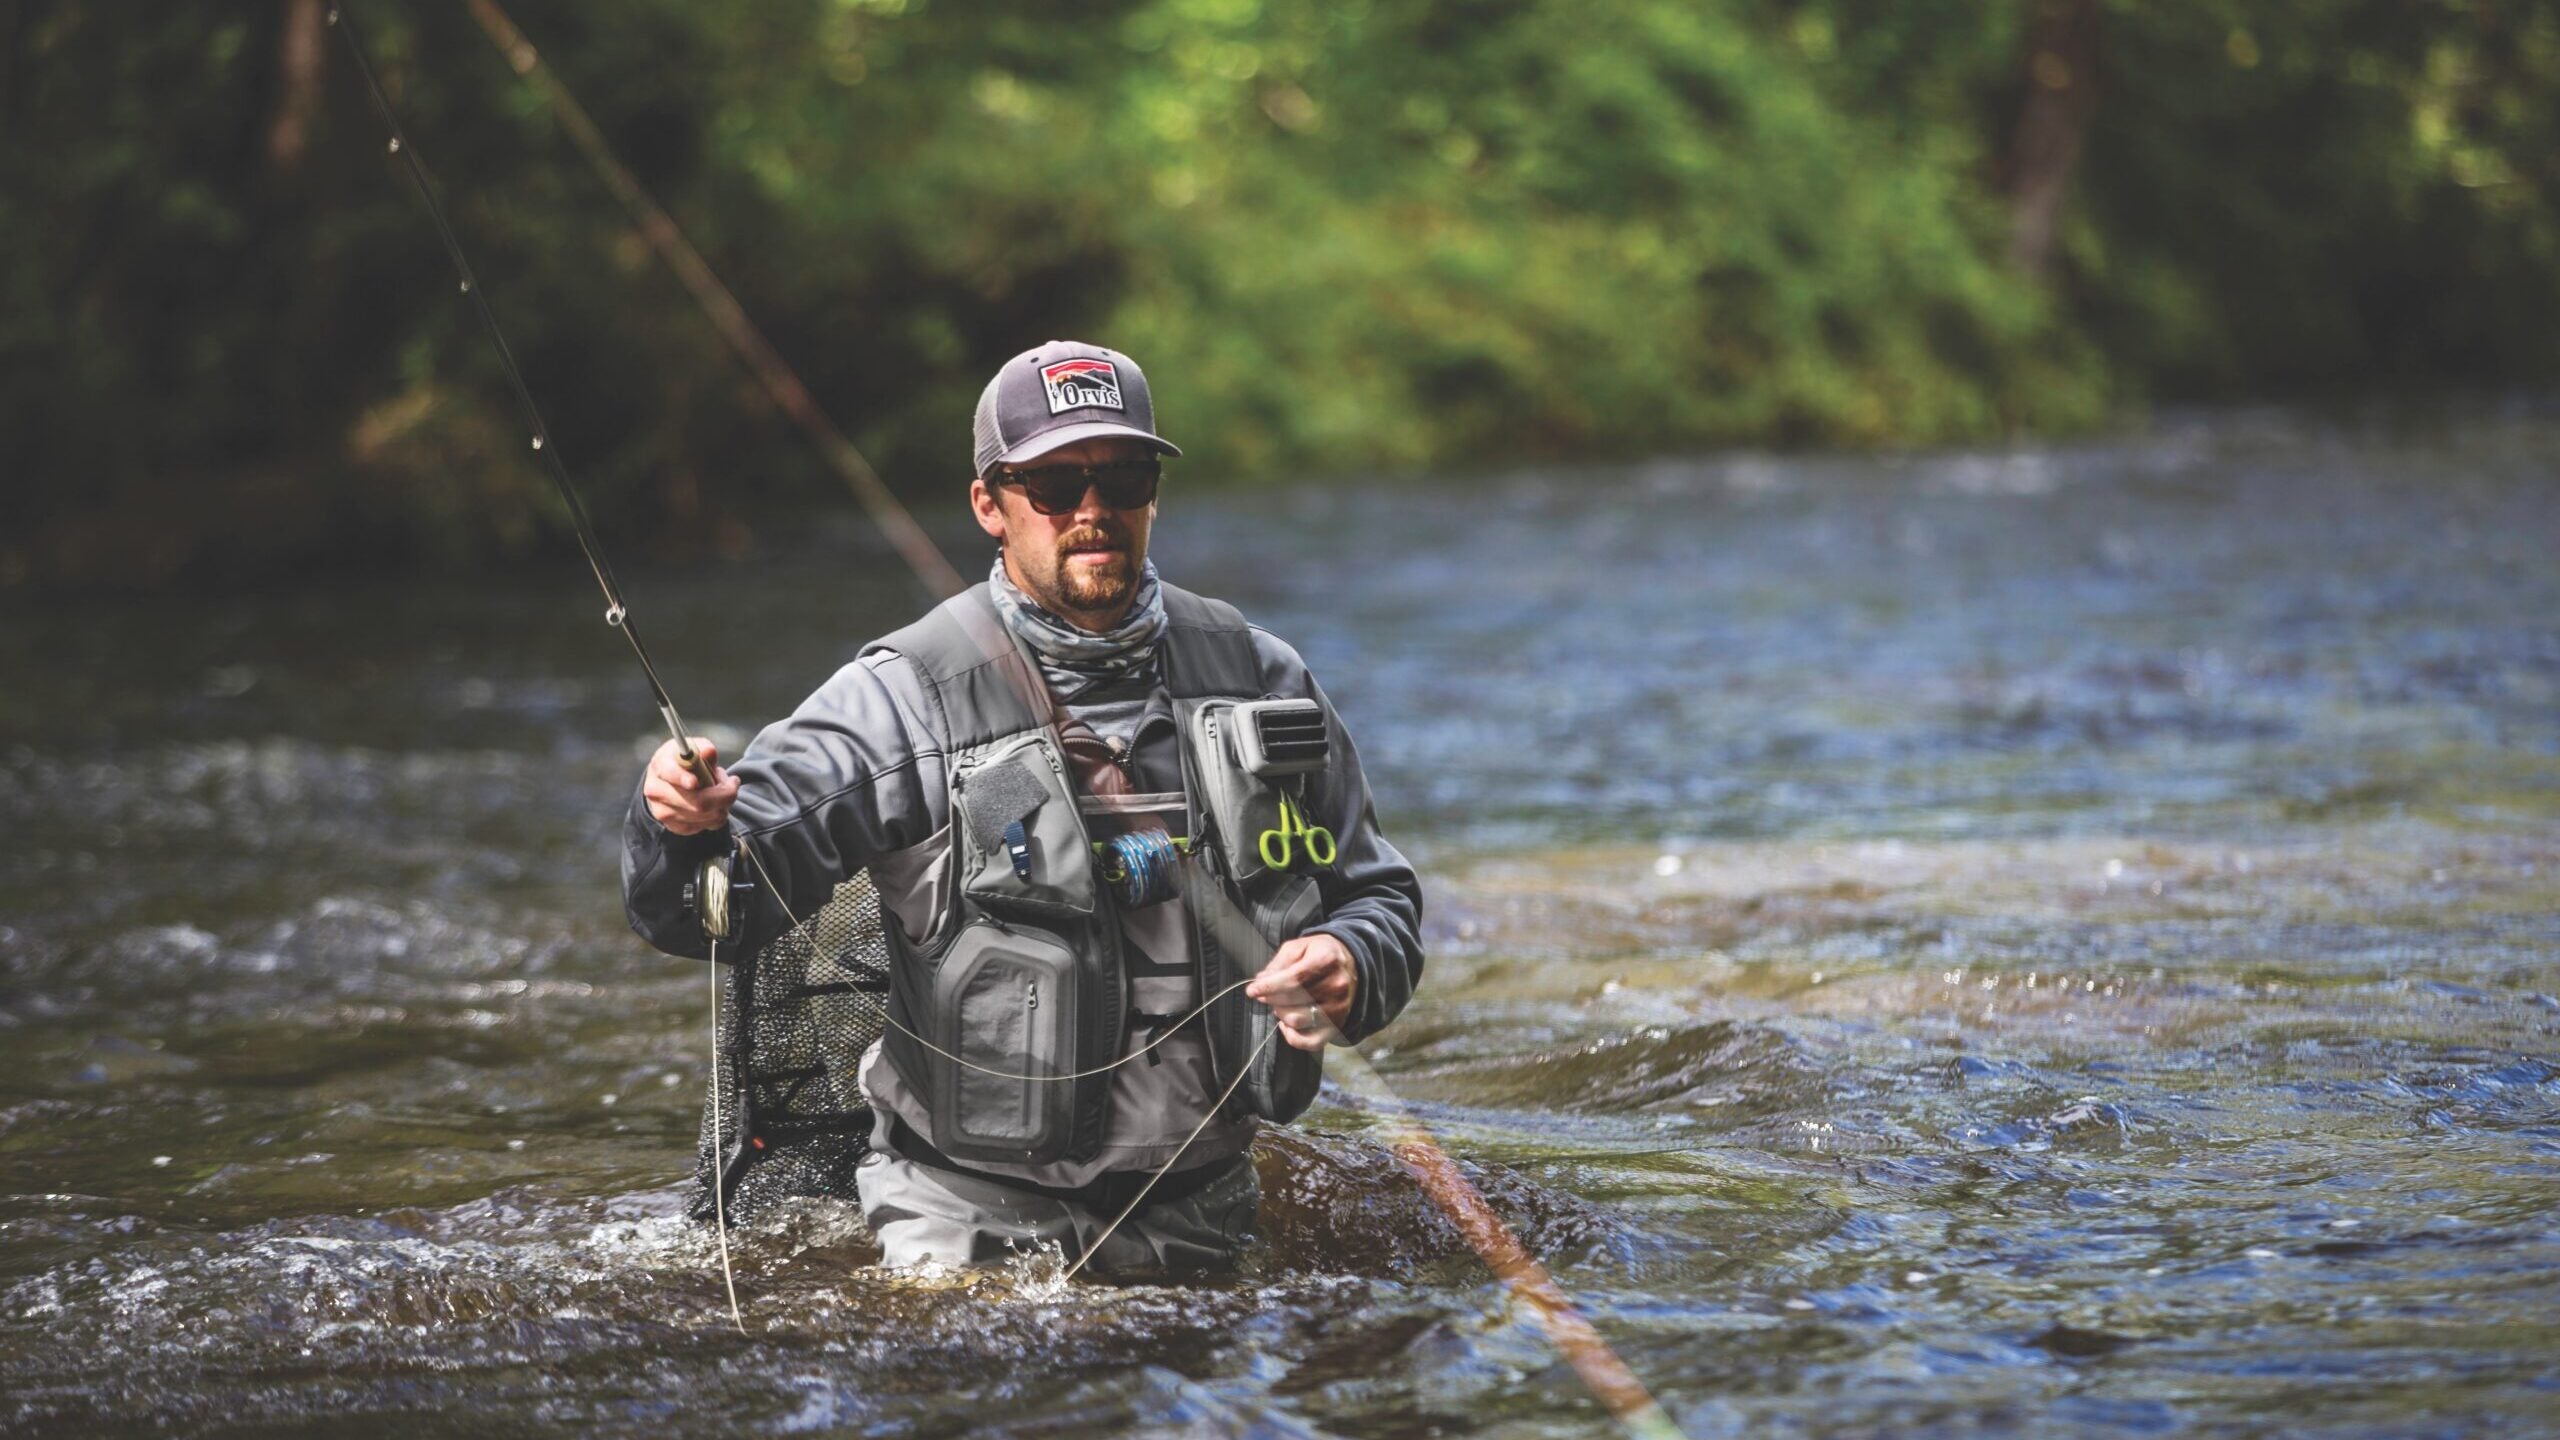 Best Fly Fishing Vest In 2023 - Top 10 Fly Fishing Vests Review 